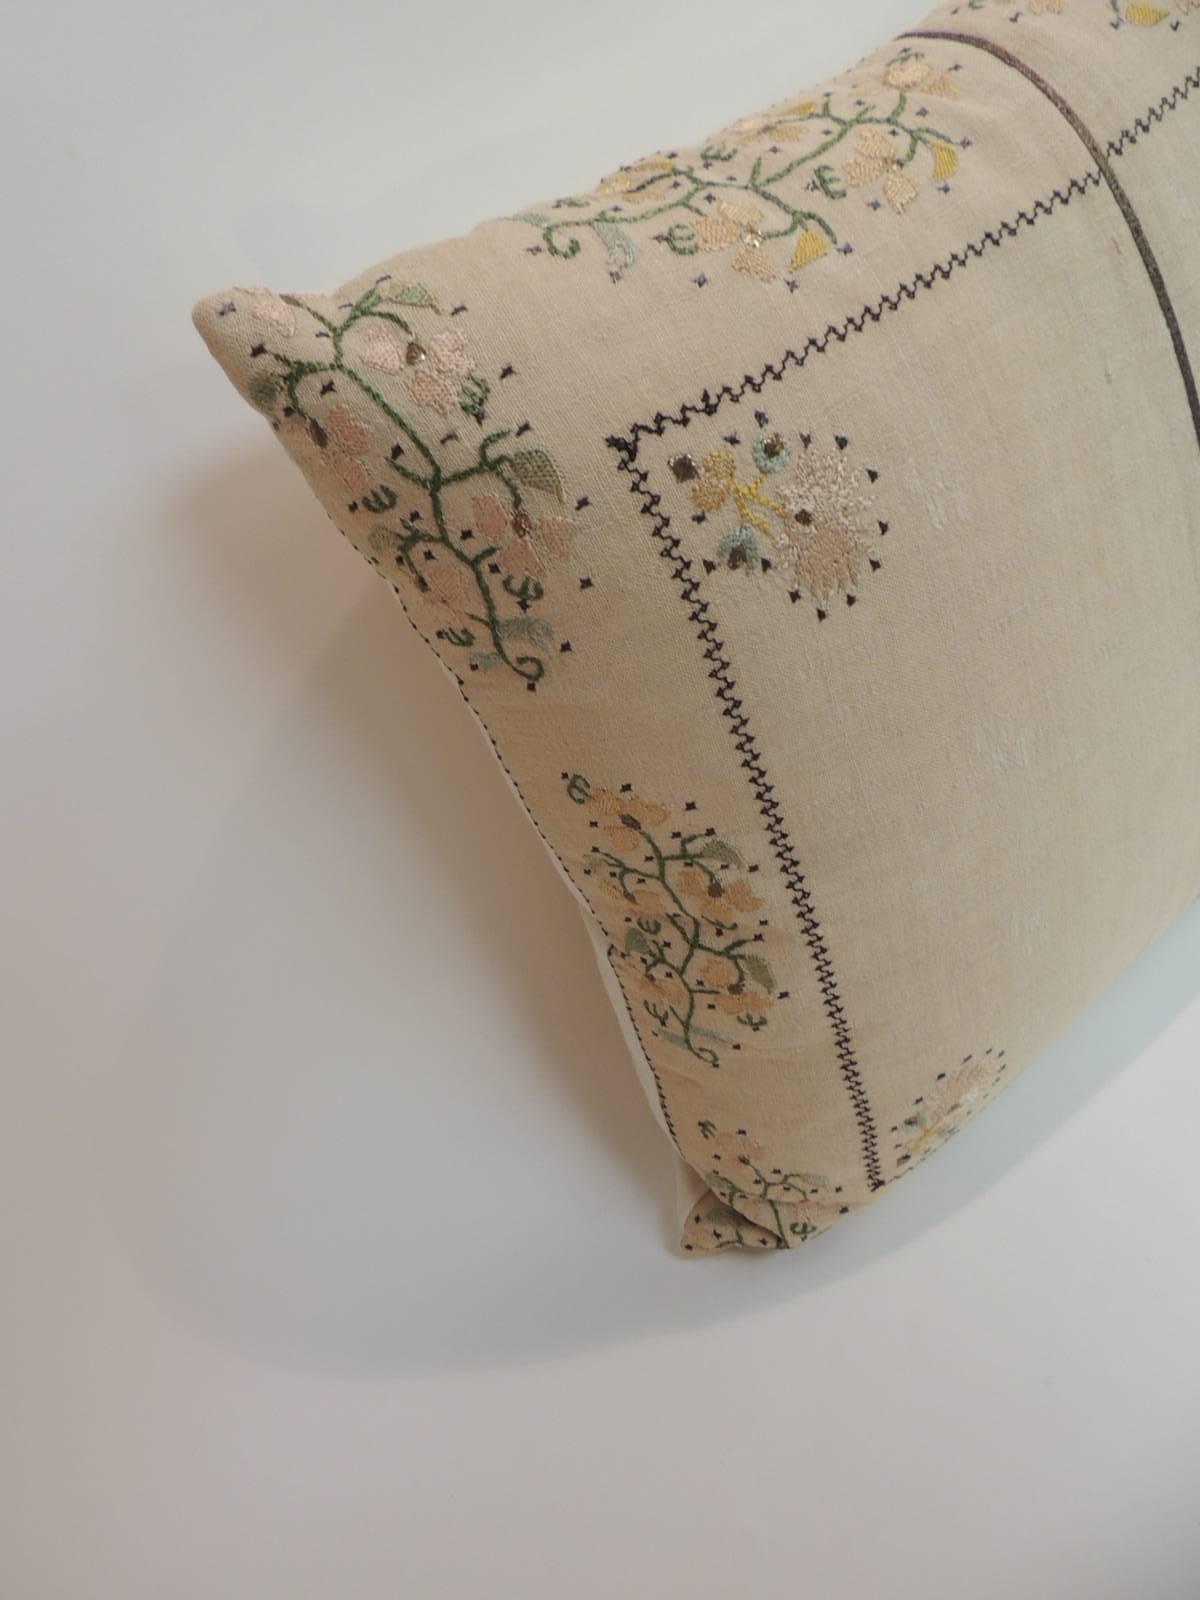 Antique Textiles Galleries:
19th century Turkish Embroidered Linen Square Decorative Pillow
Antique Turkish embroidered linen square decorative pillow embellished with metallic threads and floss silk hand-embroidered on sheer linen. The floral